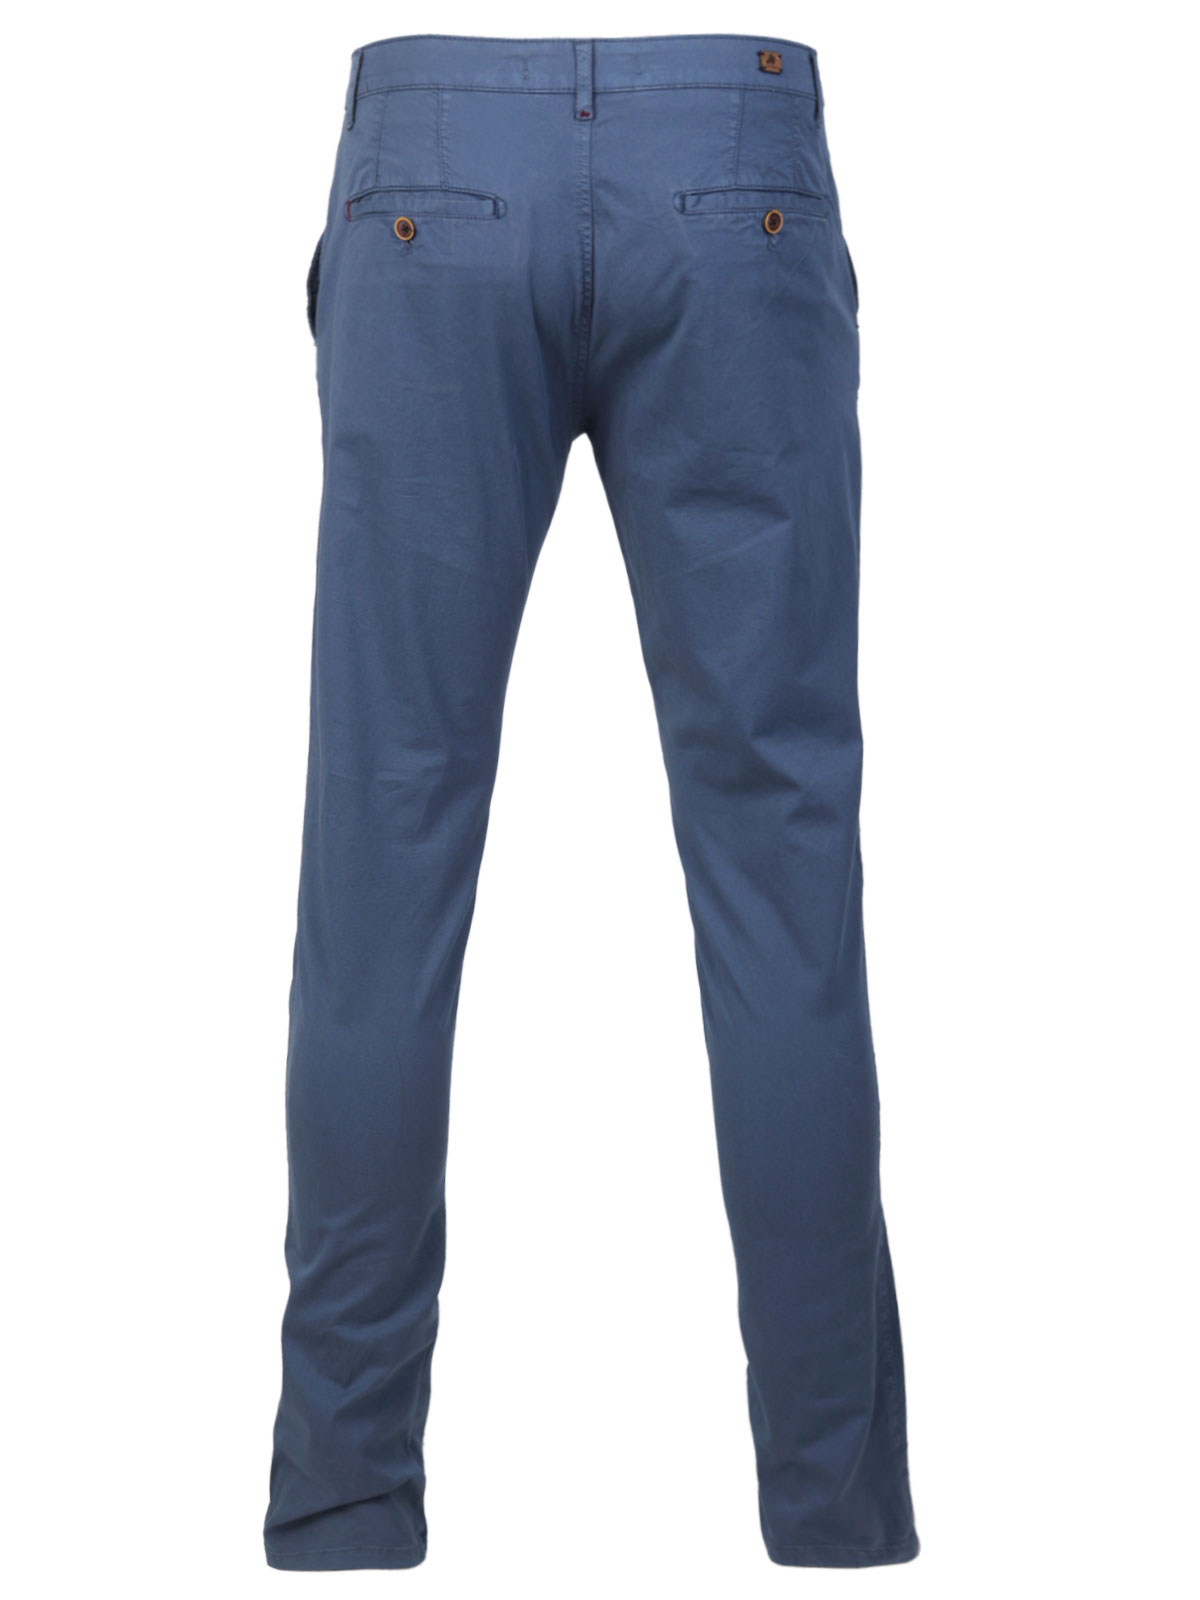 Fitted trousers in denim - 60308 € 66.93 img2